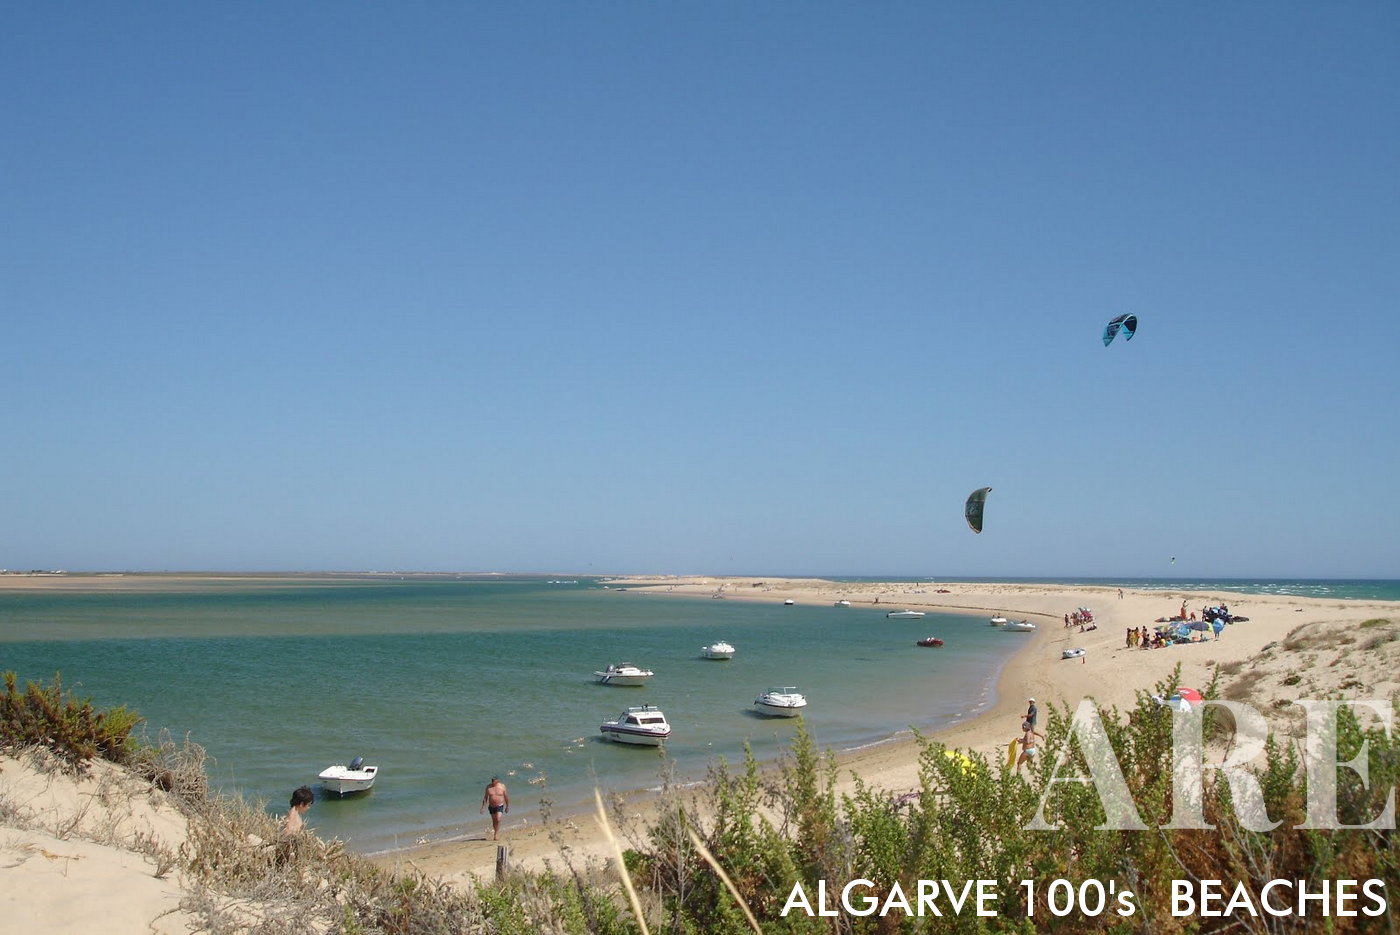 Barrinha de Faro Beach is a stunning coastal gem located near Faro, Portugal. This beach is known for its natural beauty and unique setting, as it is nestled between the Atlantic Ocean and the picturesque Ria Formosa lagoon.